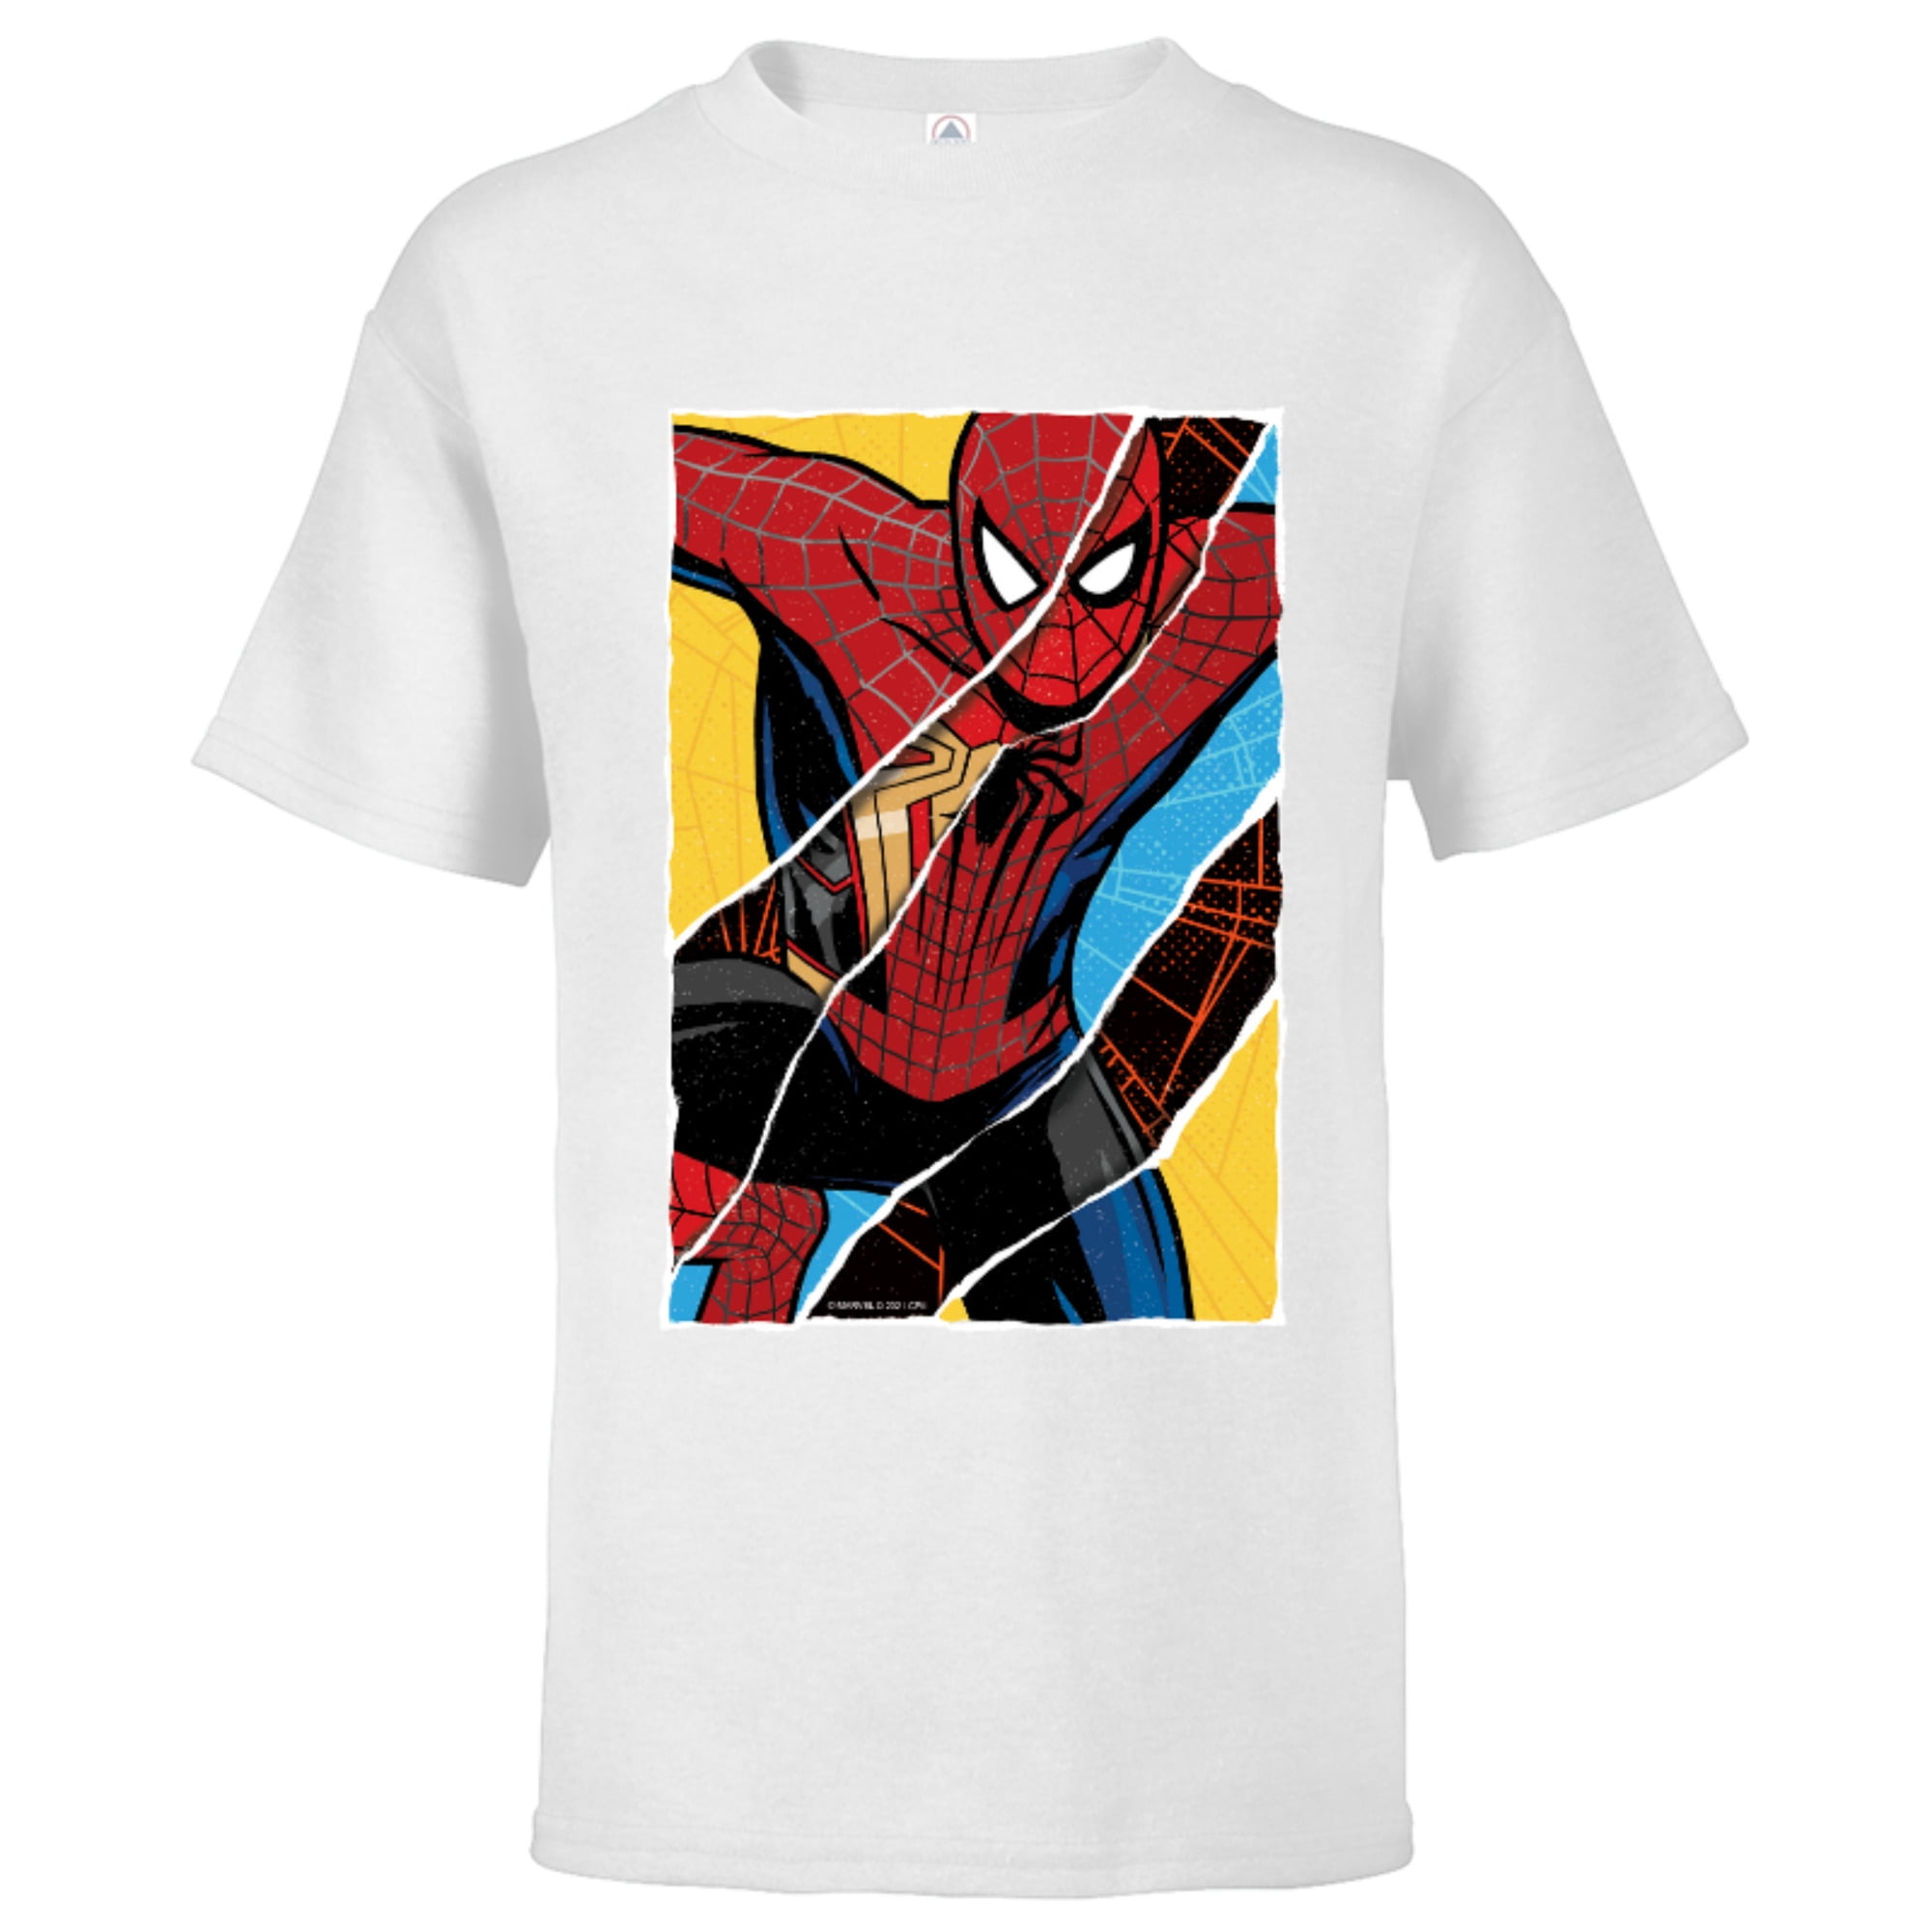 Spider-Men T-Shirt Home Collage Spider-Man: Short Sleeve - for Comic Kids Customized-Black No - Way Marvel